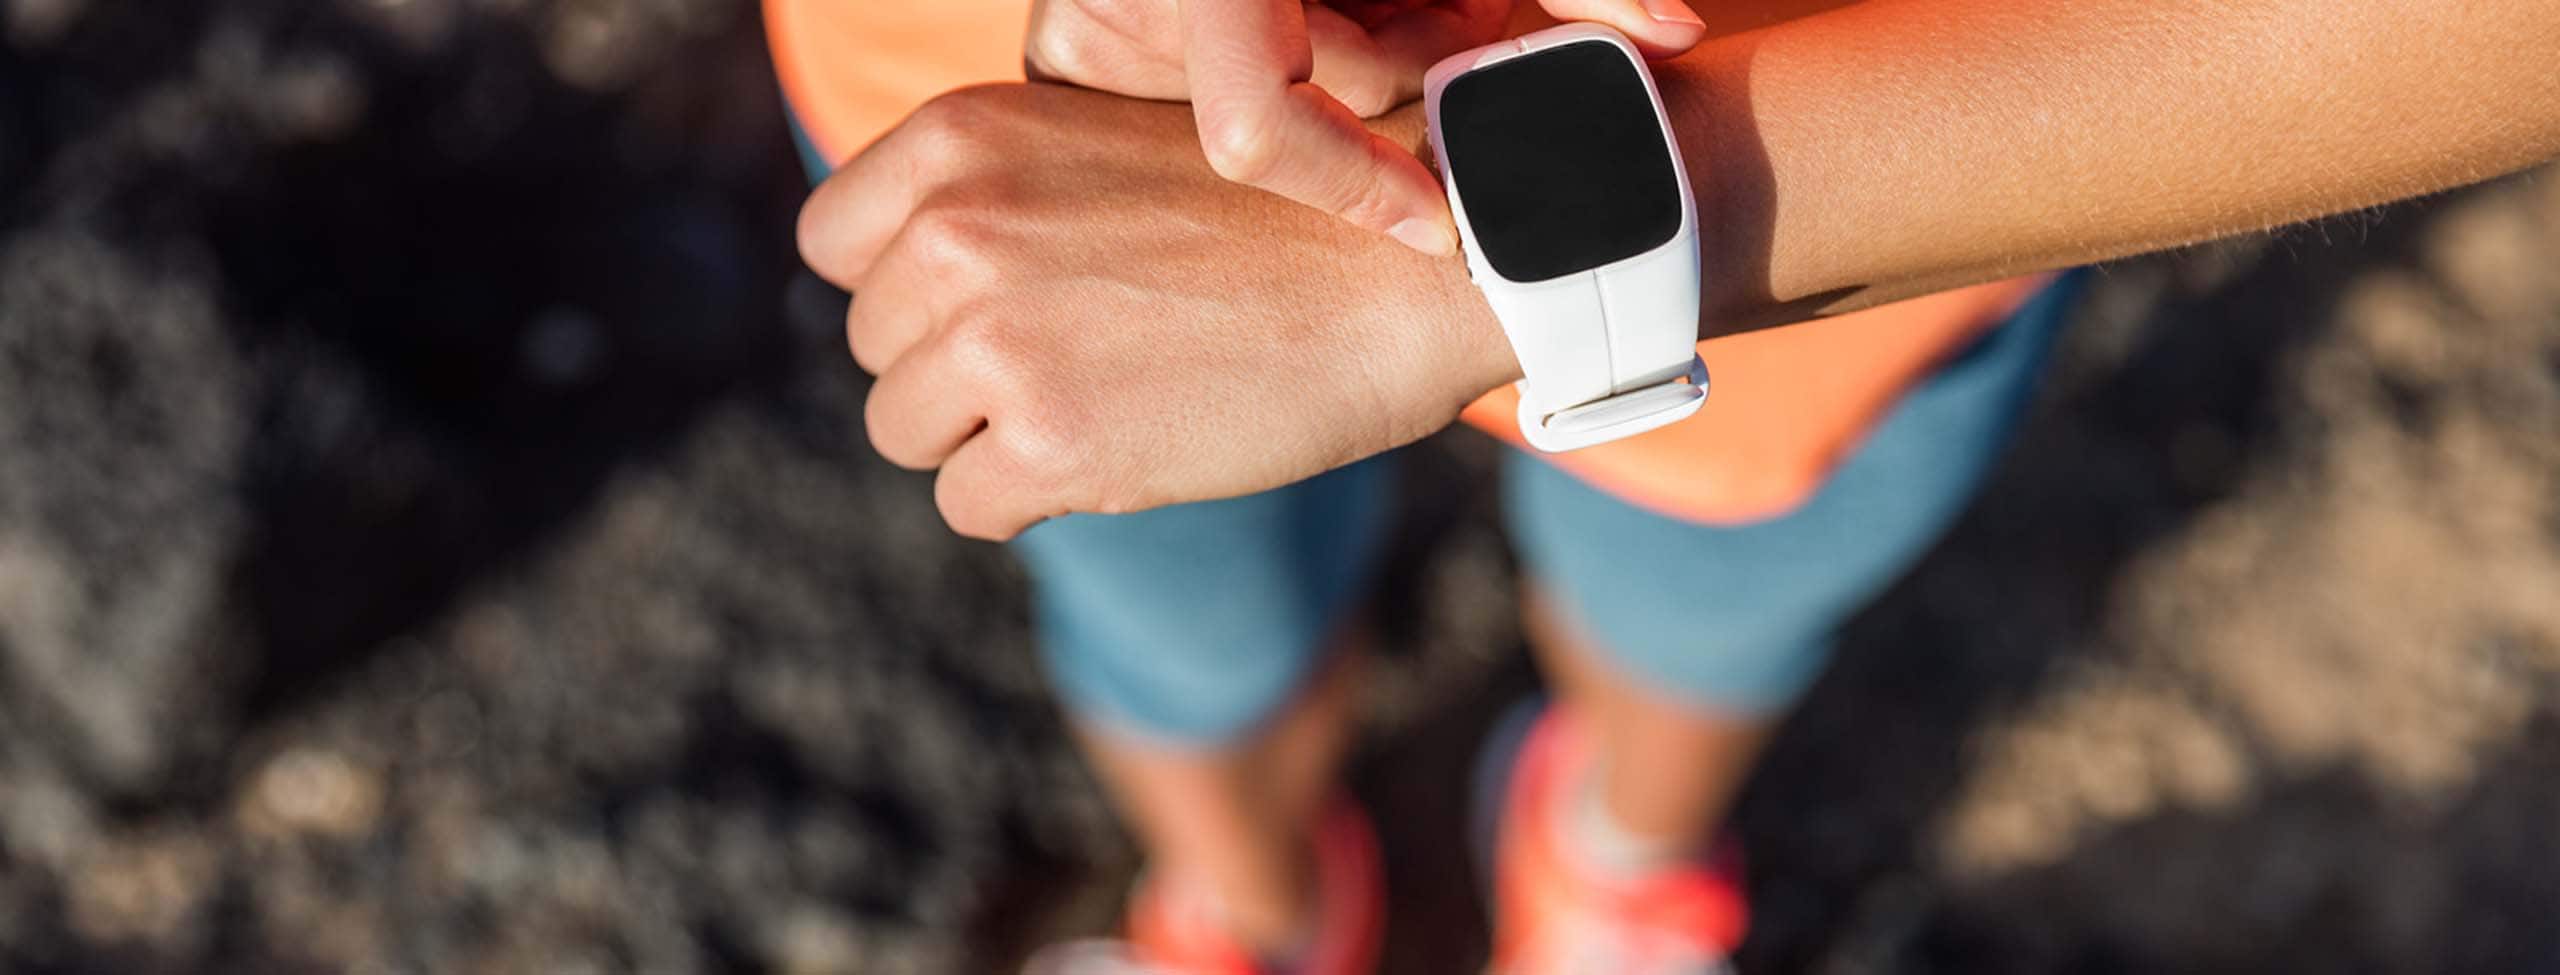 trail runner using her smart watch to monitor fitness